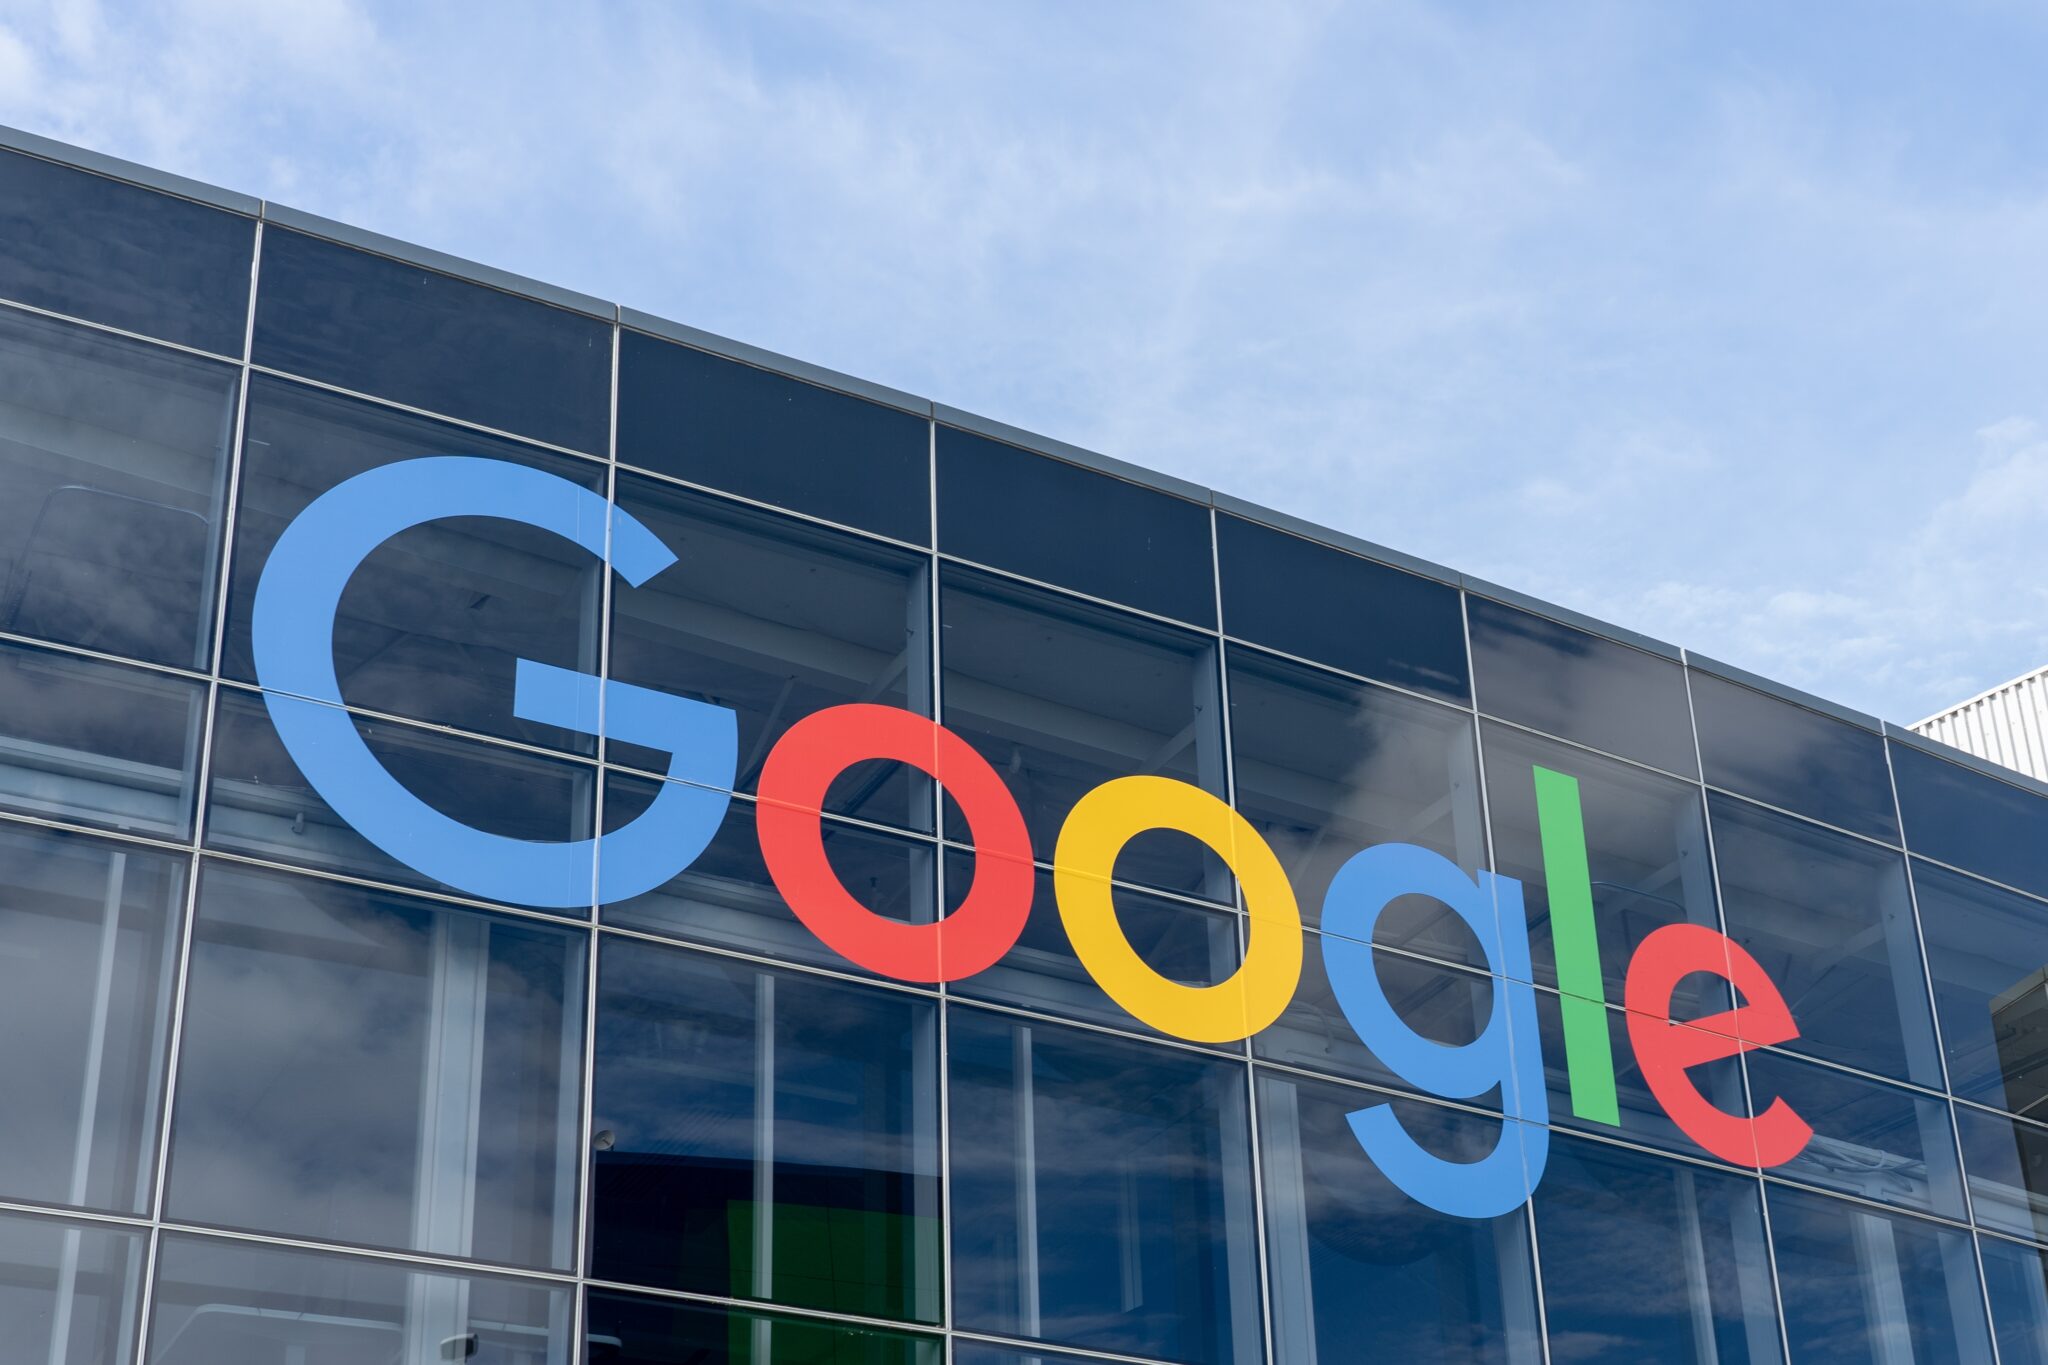 Google Announces $1B for United Kingdom Data Center, Amid Looming Layoffs